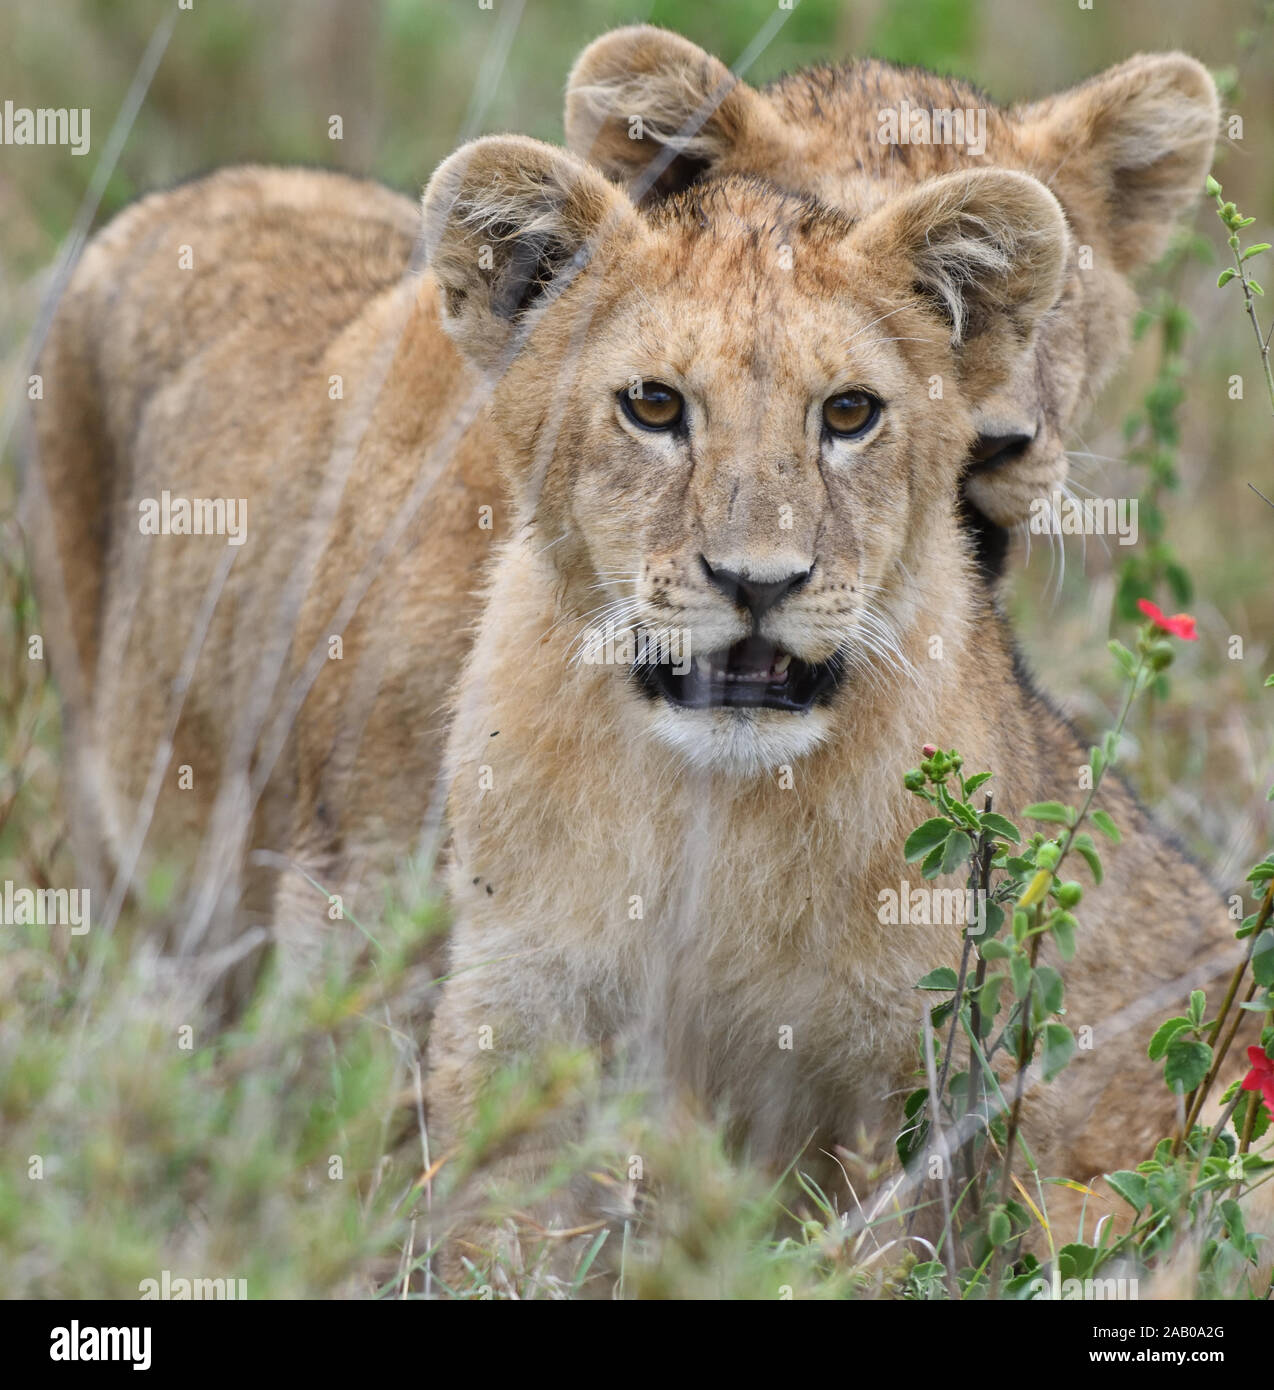 Two lion cubs (Panthera leo) play in the long dry grass of the Serengeti. Serengeti National Park, Tanzania. Stock Photo